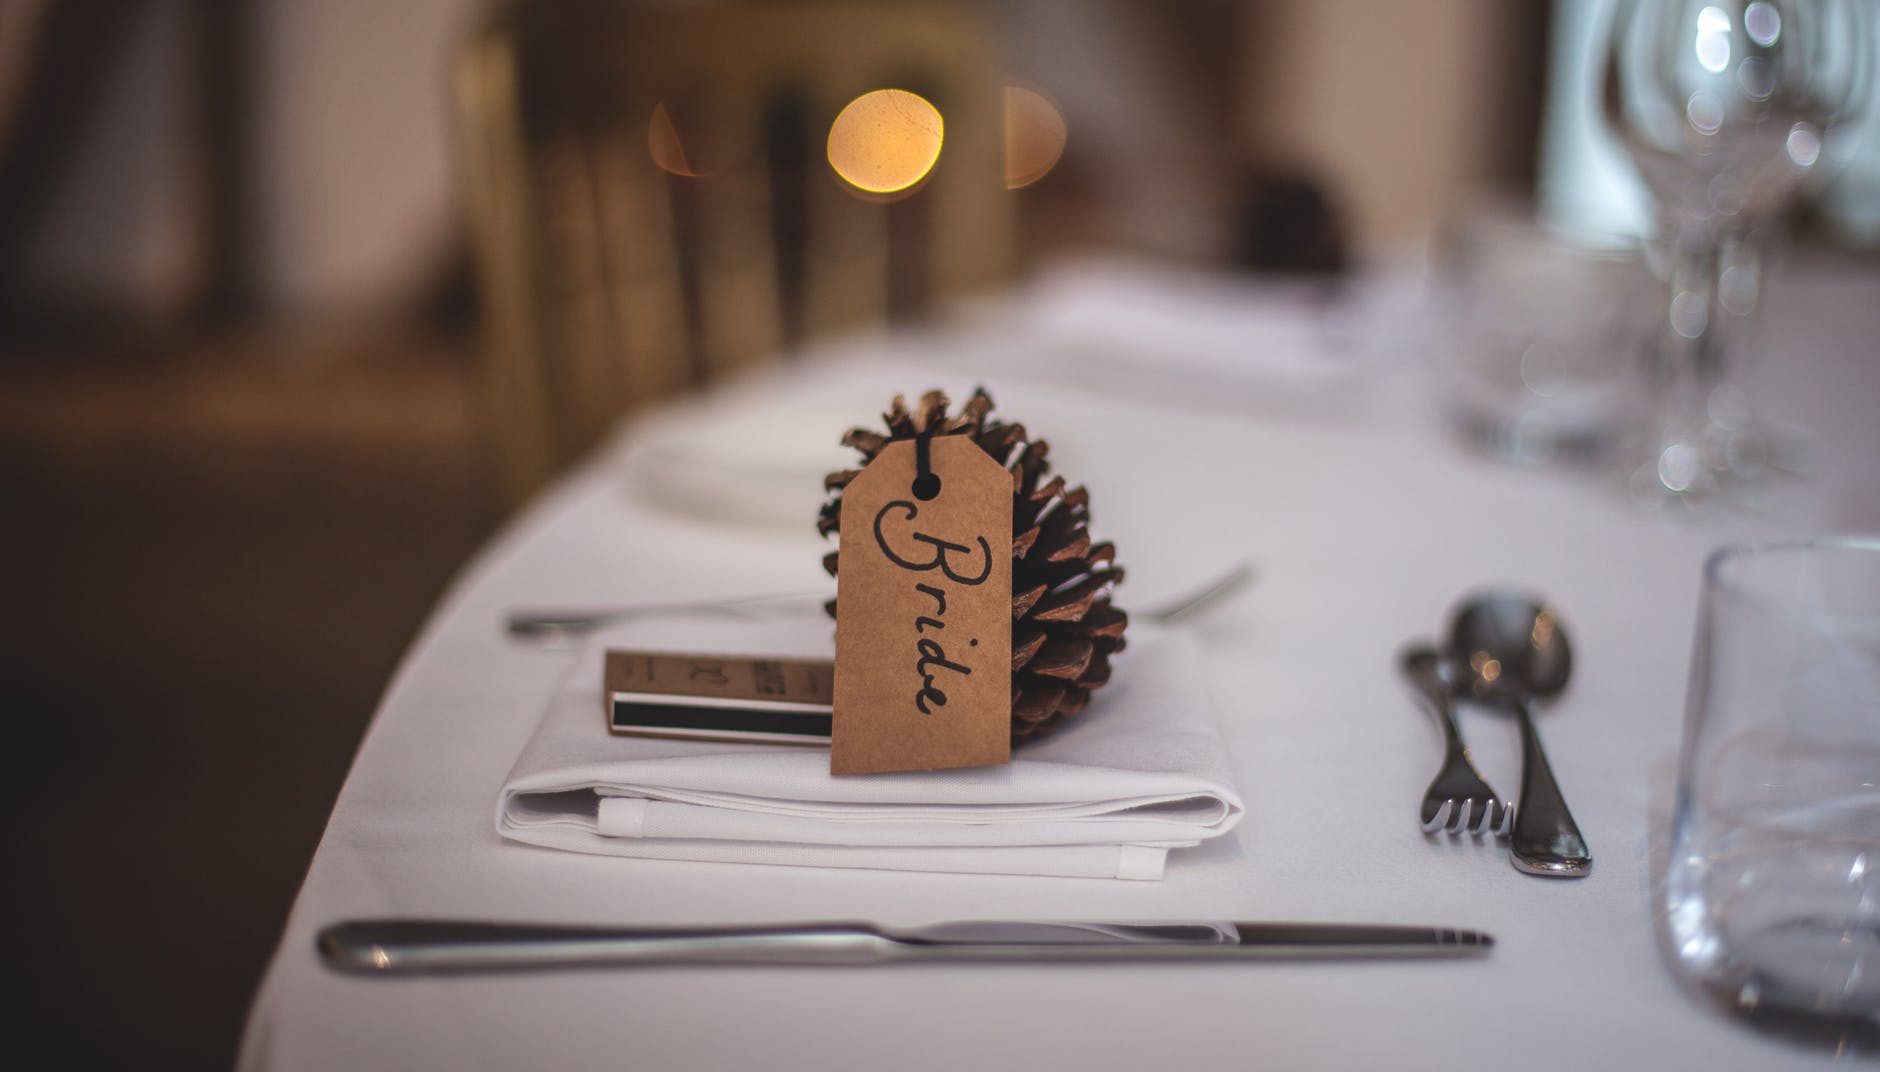 What Should be on the Wedding Table?